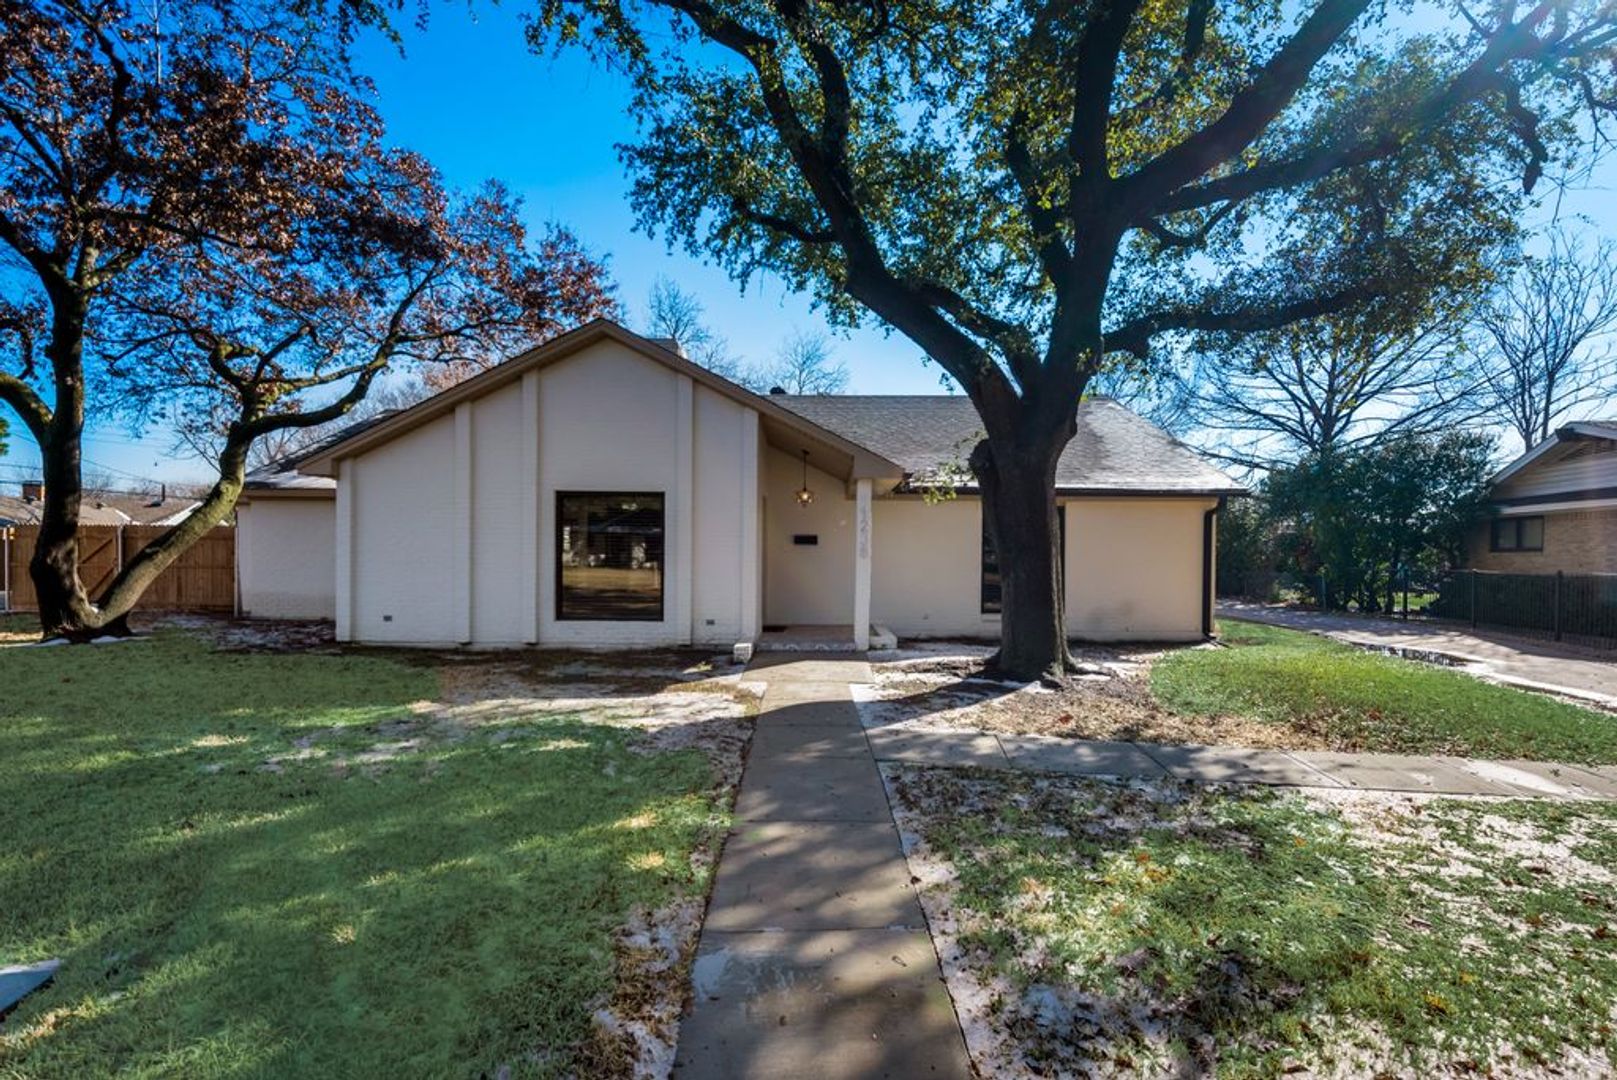 Recently Renovated 4-bed 3-bath in Dallas's highly desirable Kenilworth Estates Subdivision